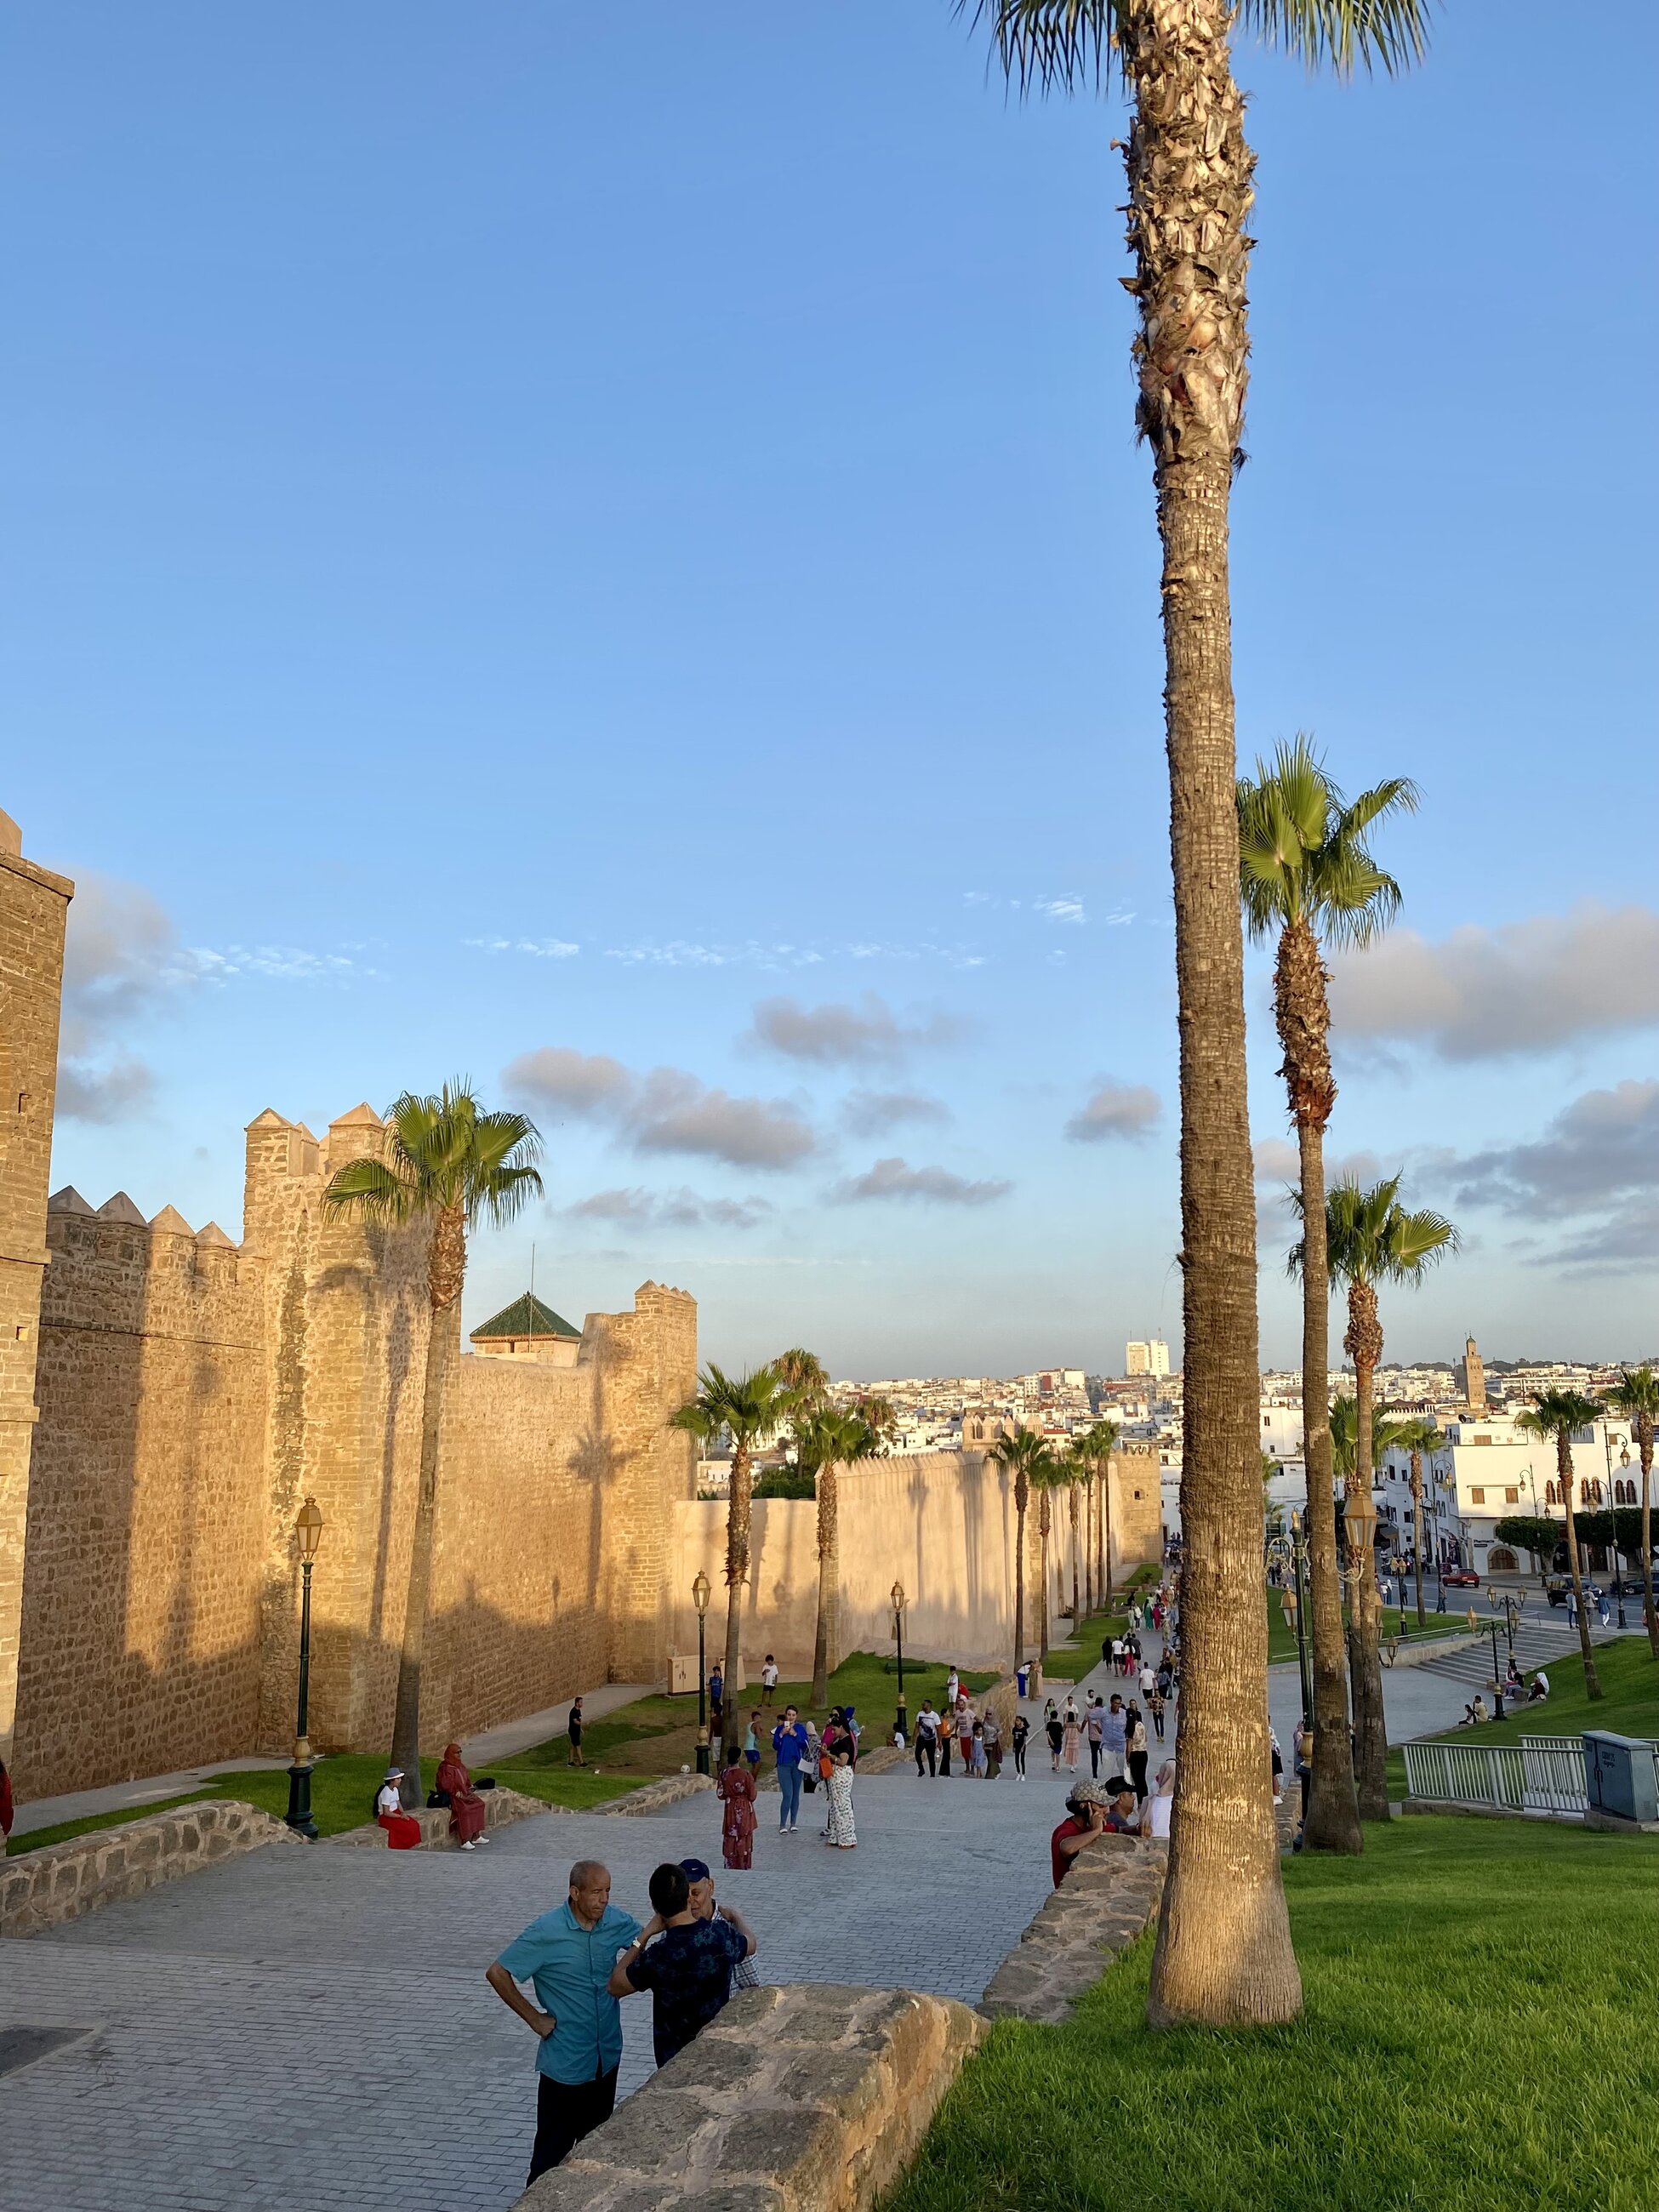 An afternoon in Rabat